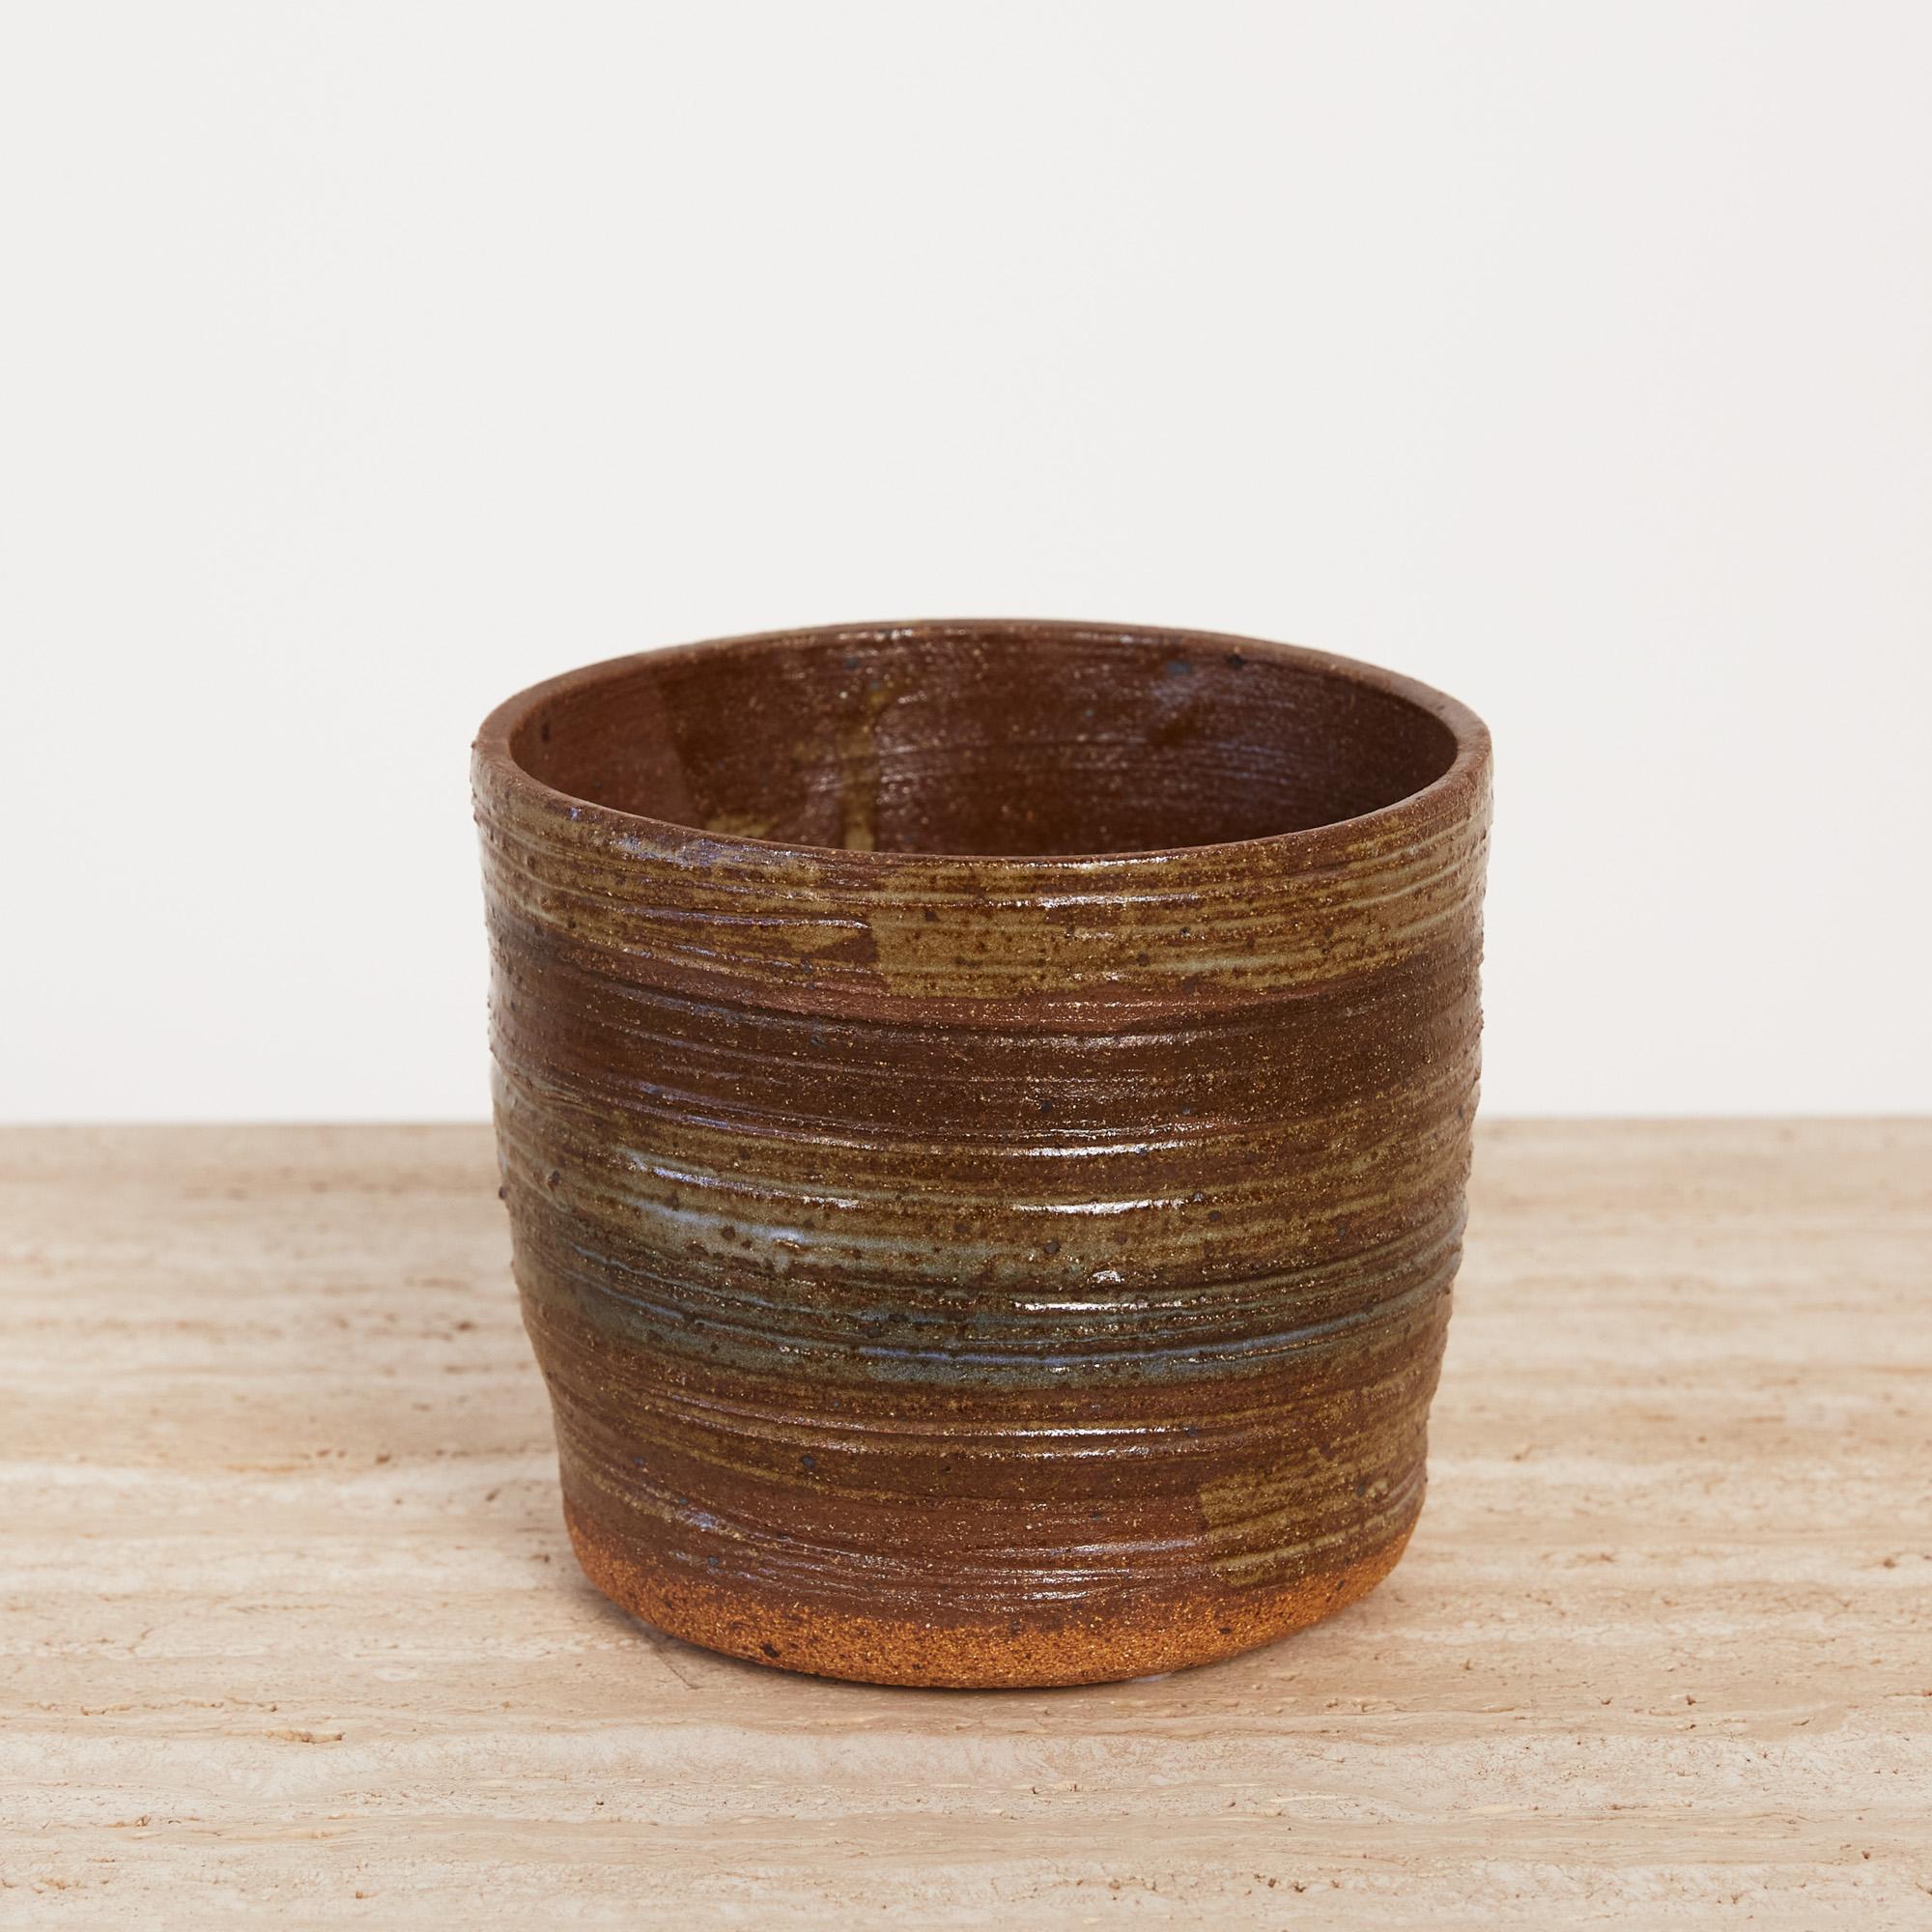 Textured, wide-mouthed ceramic piece perfect as a cup or decorative vessel. The exterior features hand formed striations and organic gradient glaze with rings of golden ochre, burnt umbre, and stone blue. A textured, unglazed, raw ceramic ring lines